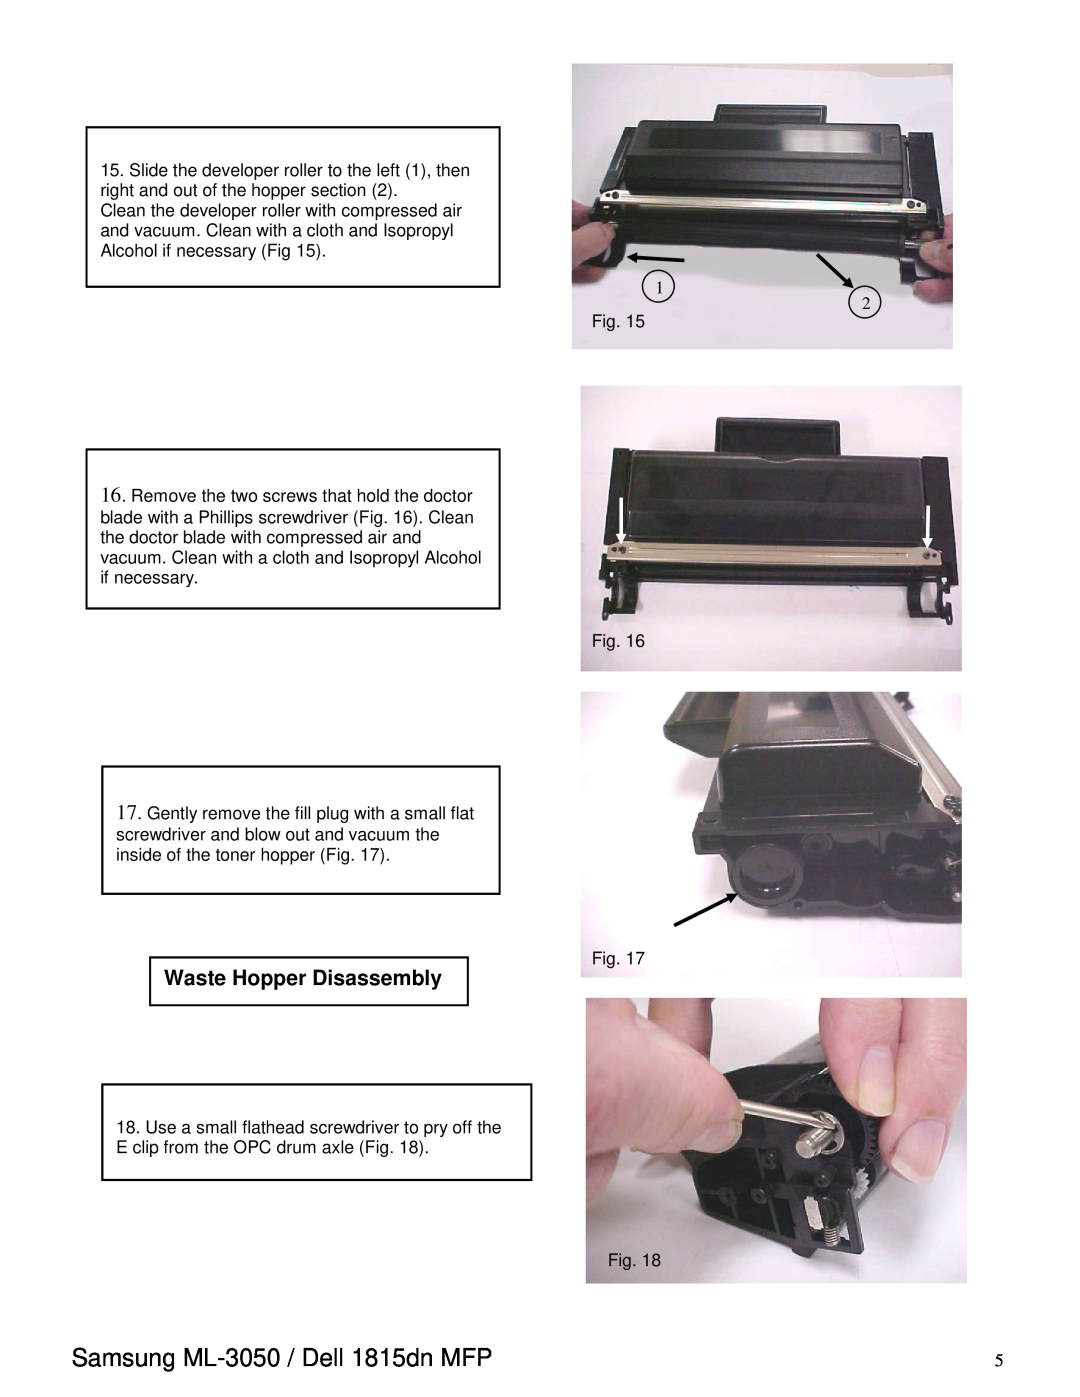 Oasis Concepts manual Waste Hopper Disassembly, Samsung ML-3050 /Dell 1815dn MFP 